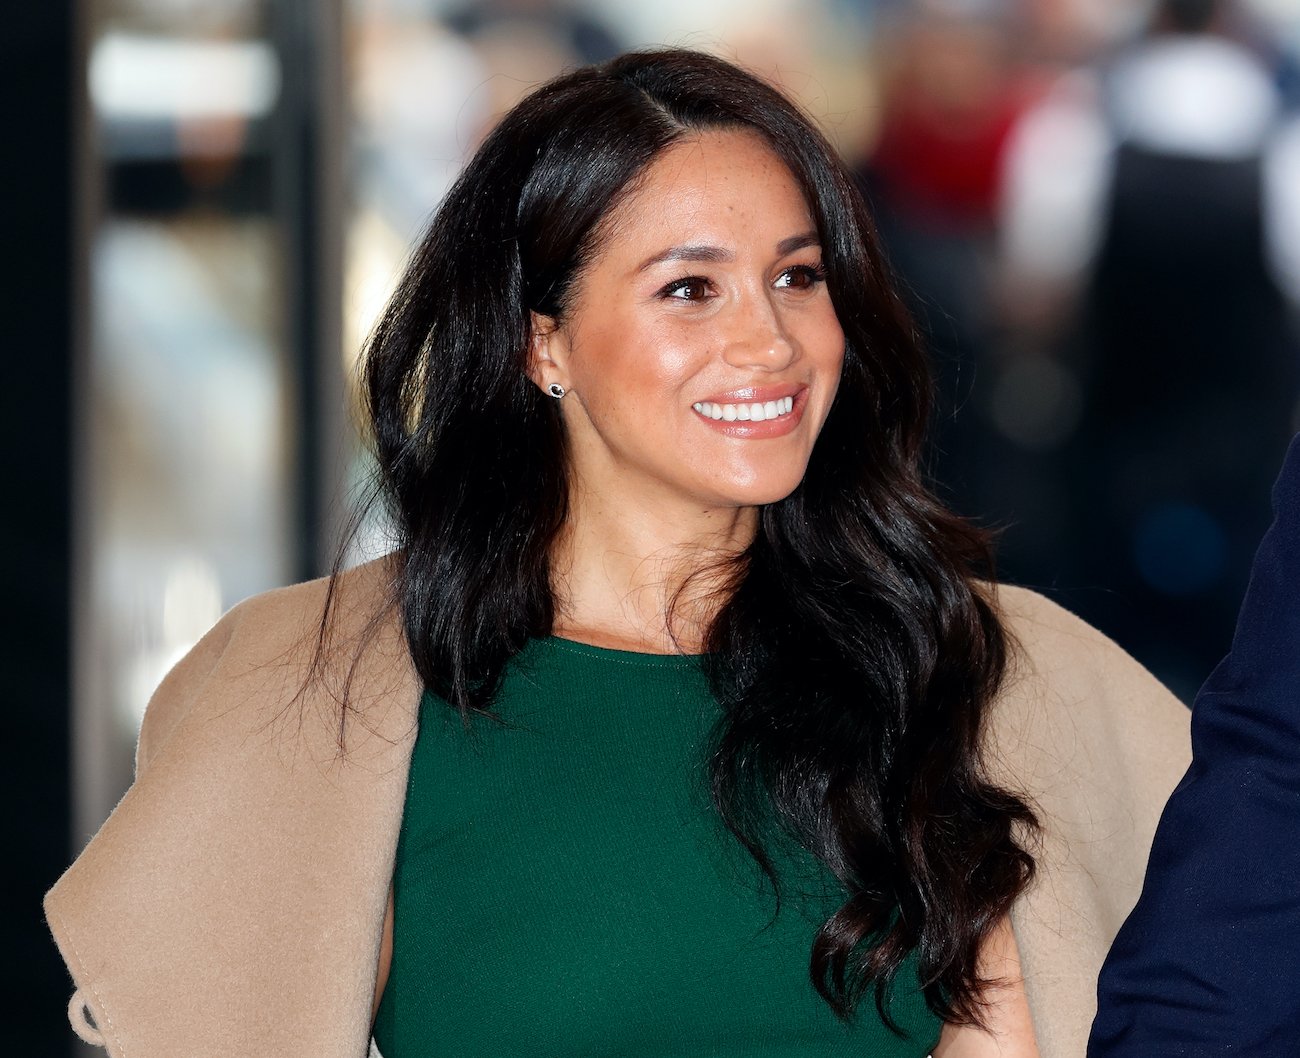 Meghan Markle at the WellChild Awards in 2019